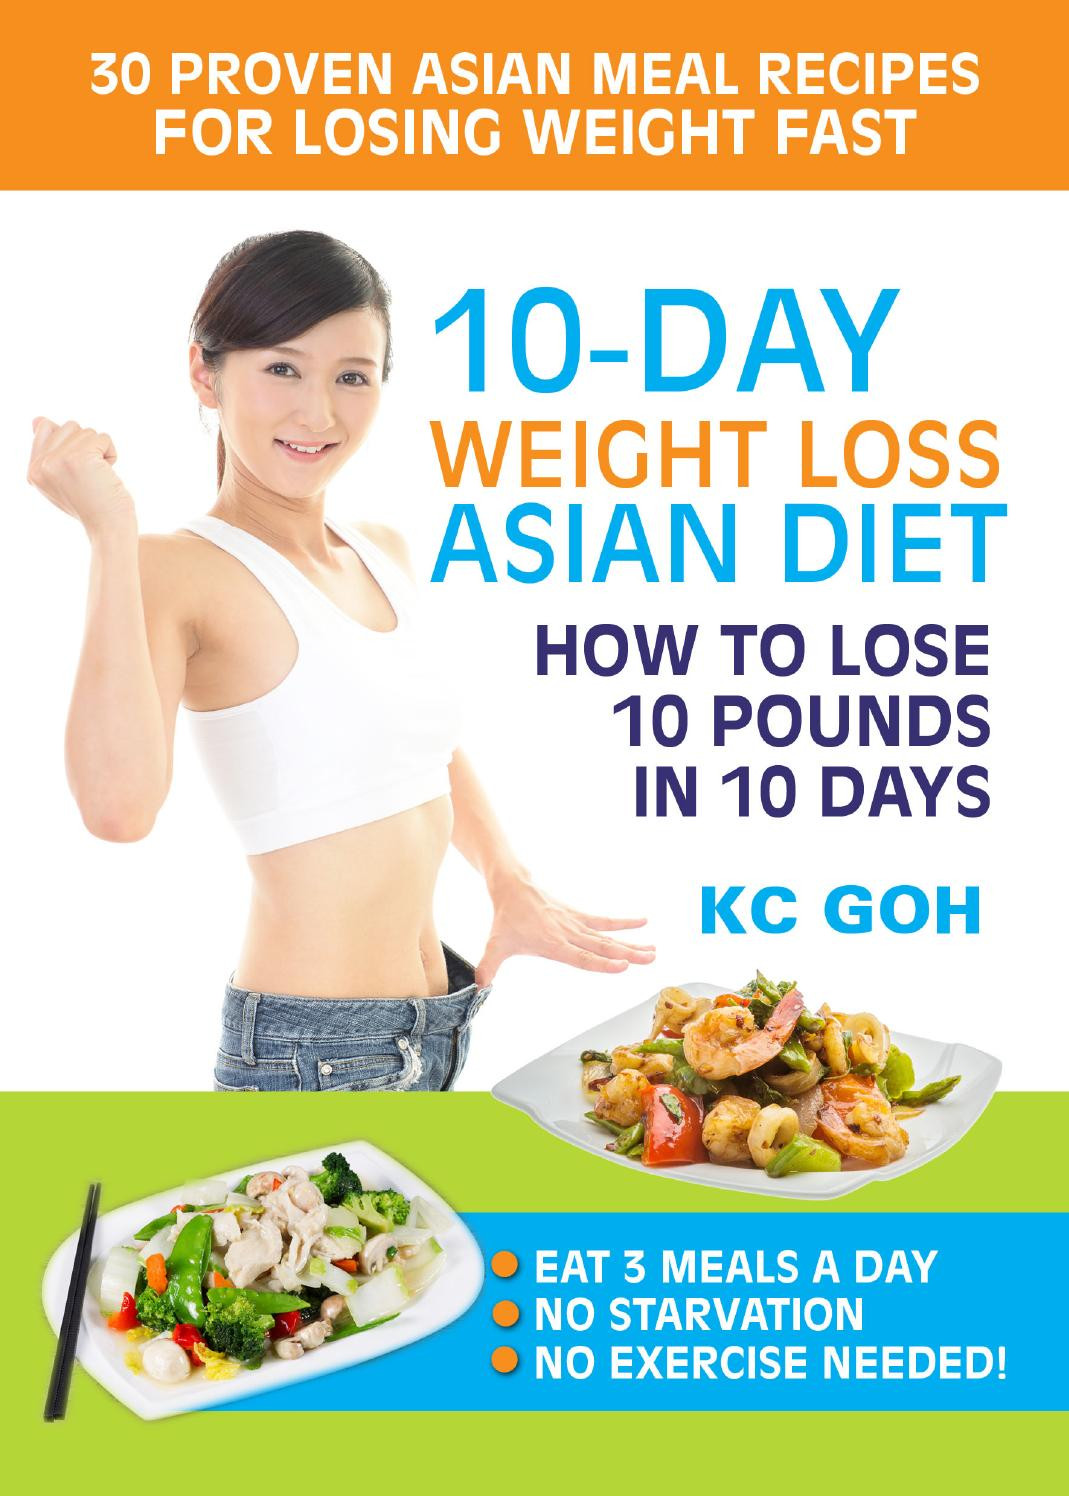 Quick Weight Loss Diet 10 Pounds
 10 Day Weight Loss Asian Diet How to lose 10 Pounds In 10